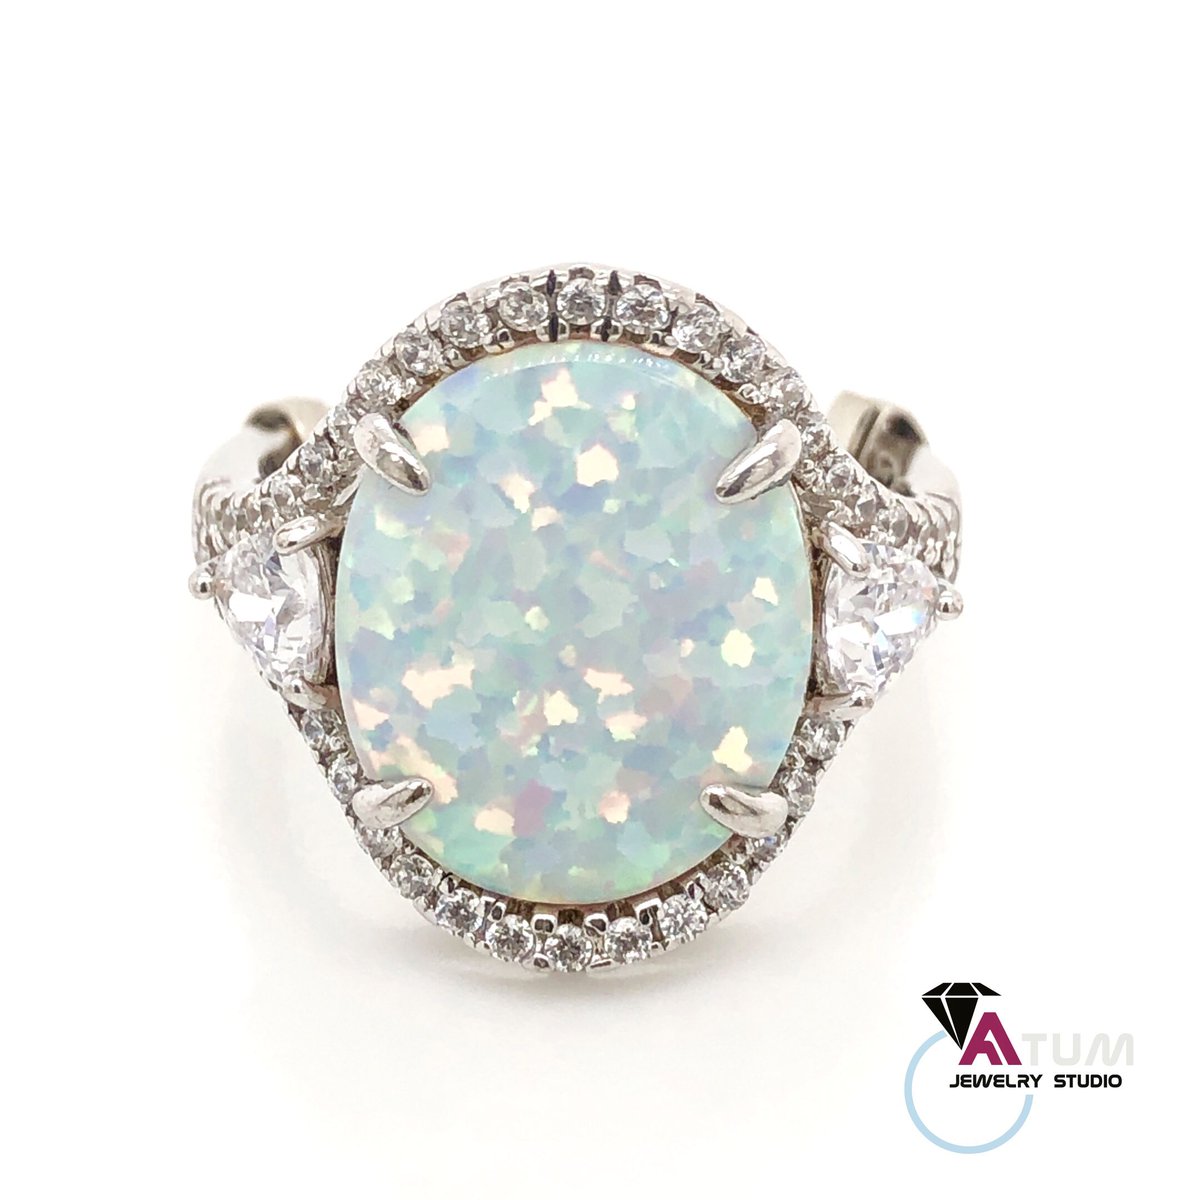 In Irvine, CA. Tel: (949) 402-8478
The best way to make a statement is through a piece of jewels 💋💋💋
.
#opal #gemstonejewelry #finegems #australianopals #finejewellry #highjewelry #opaljewelry #opalring
#customjewelry #jewelrystylist #irvinelife #costamesalife #ocphotographer